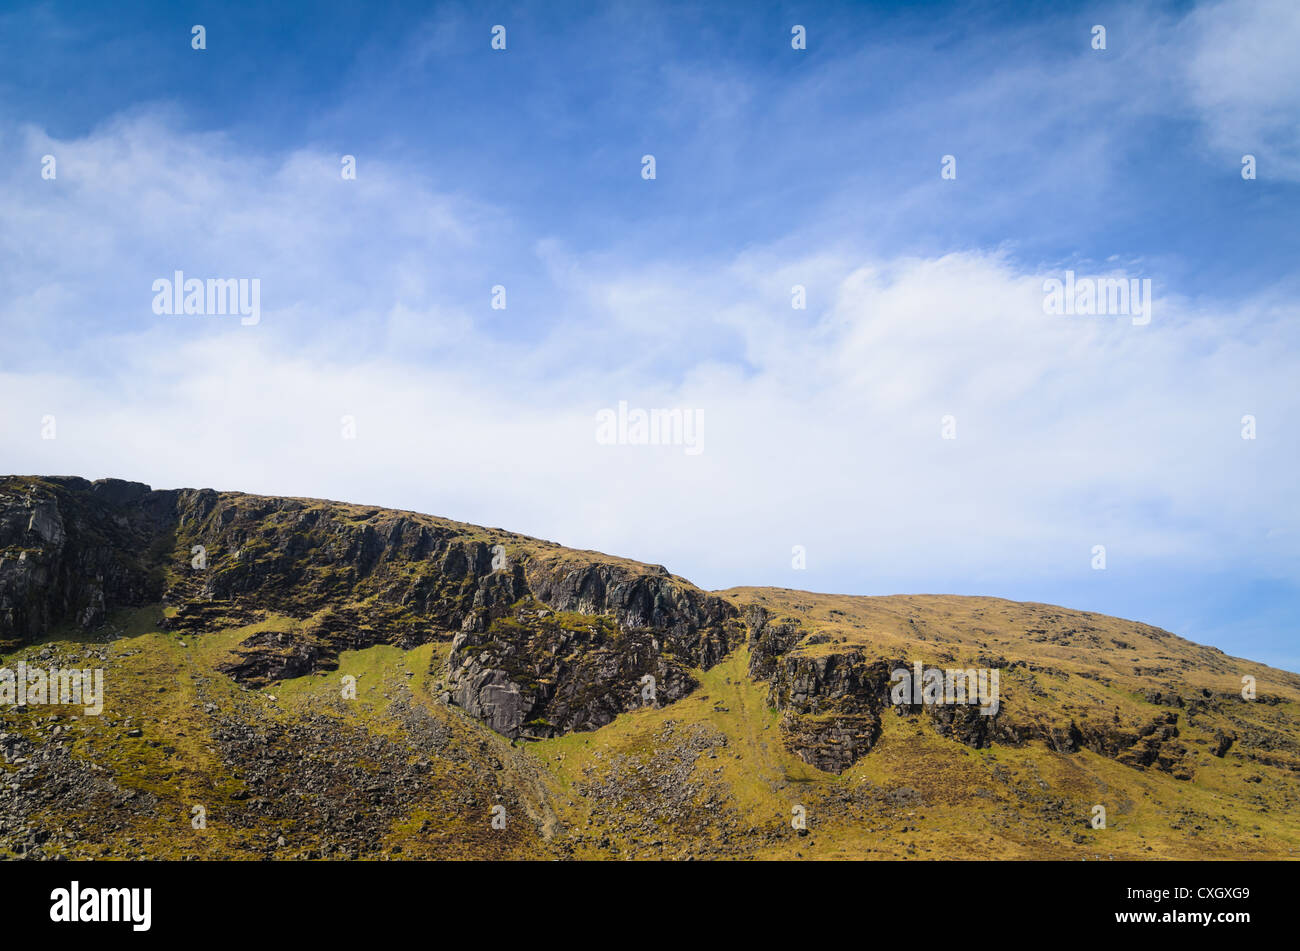 A scene from the Mourne Mountains, Ireland. Stock Photo